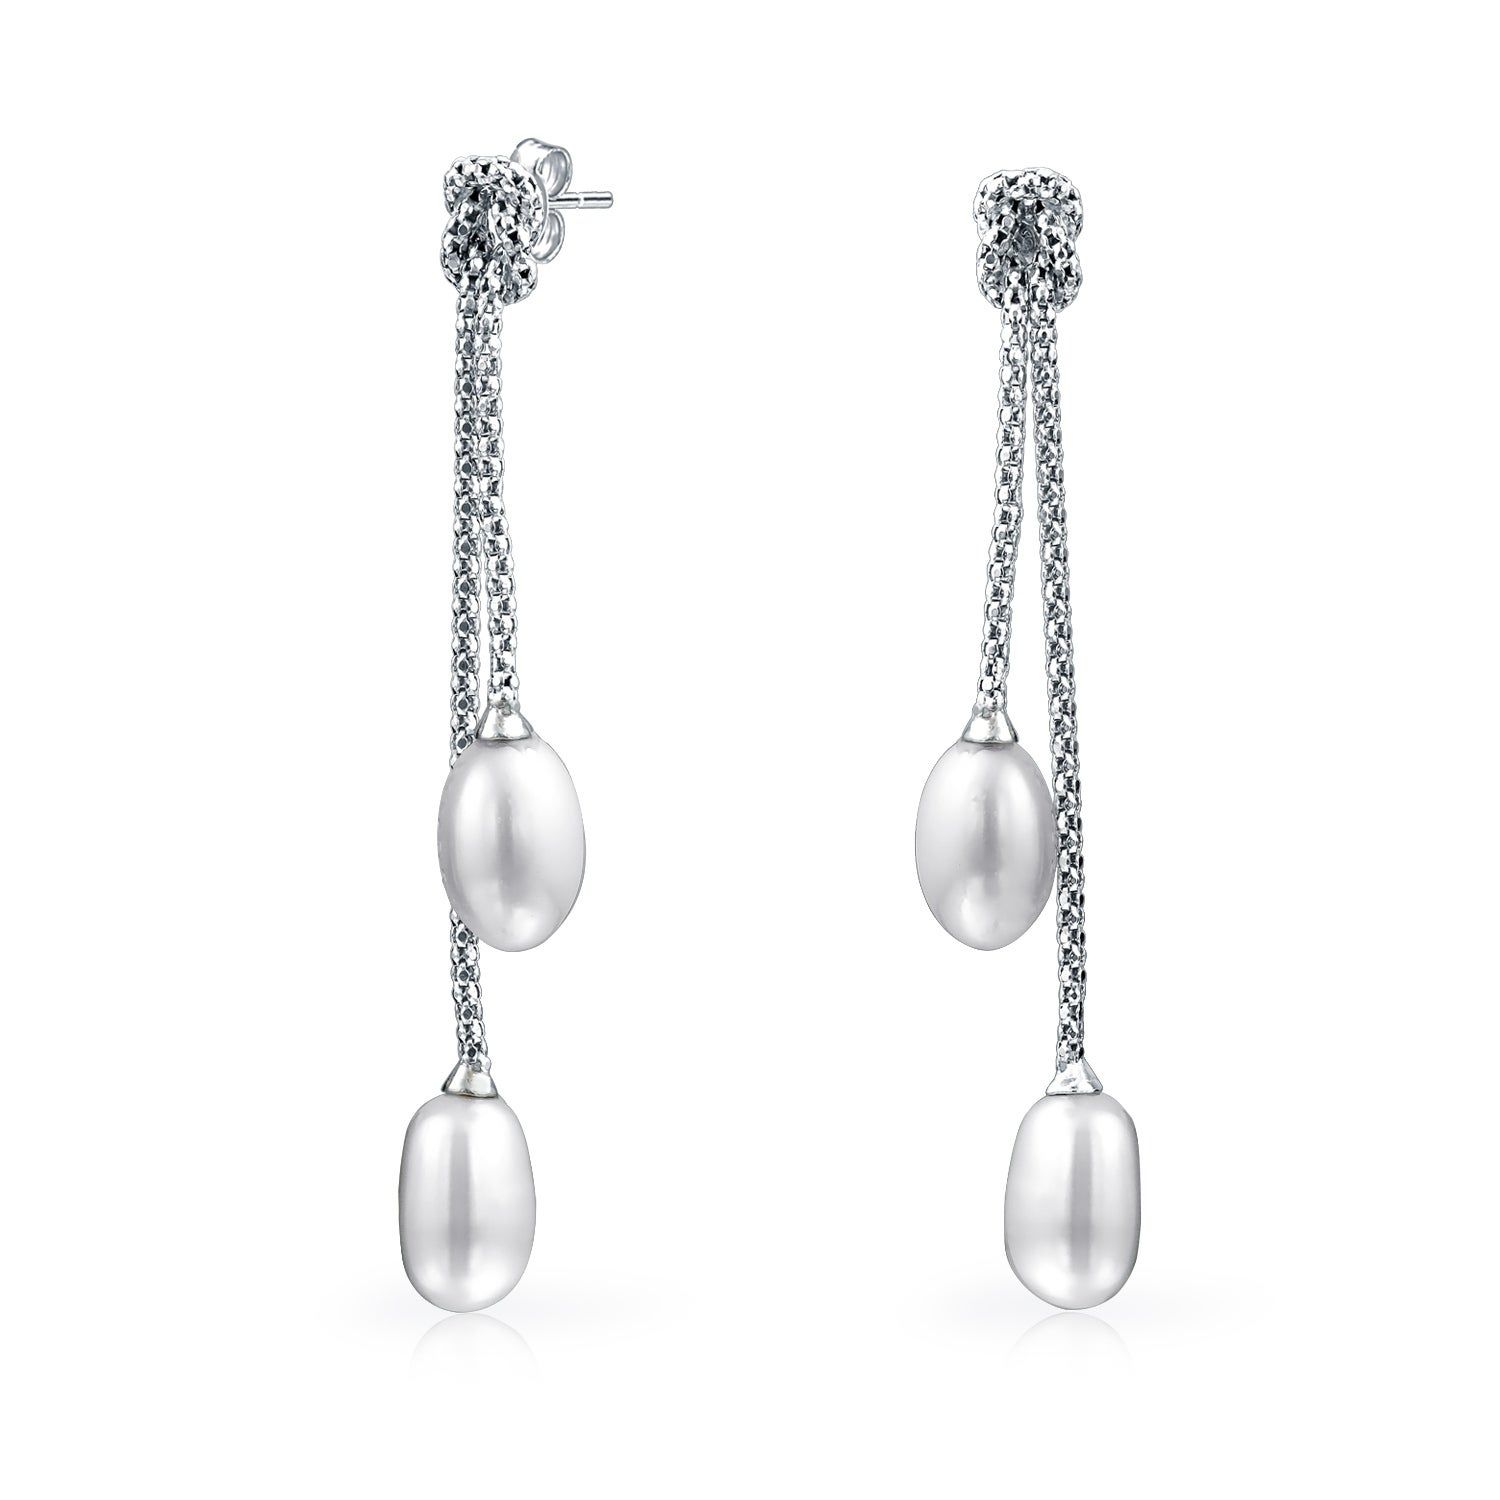 Bling Jewelry Sterling Silver Love Knot Twin Freshwater Cultured Pearl  Dangling Earrings Regarding Most Recently Released Dangling Freshwater Cultured Pearl Rings (View 9 of 25)